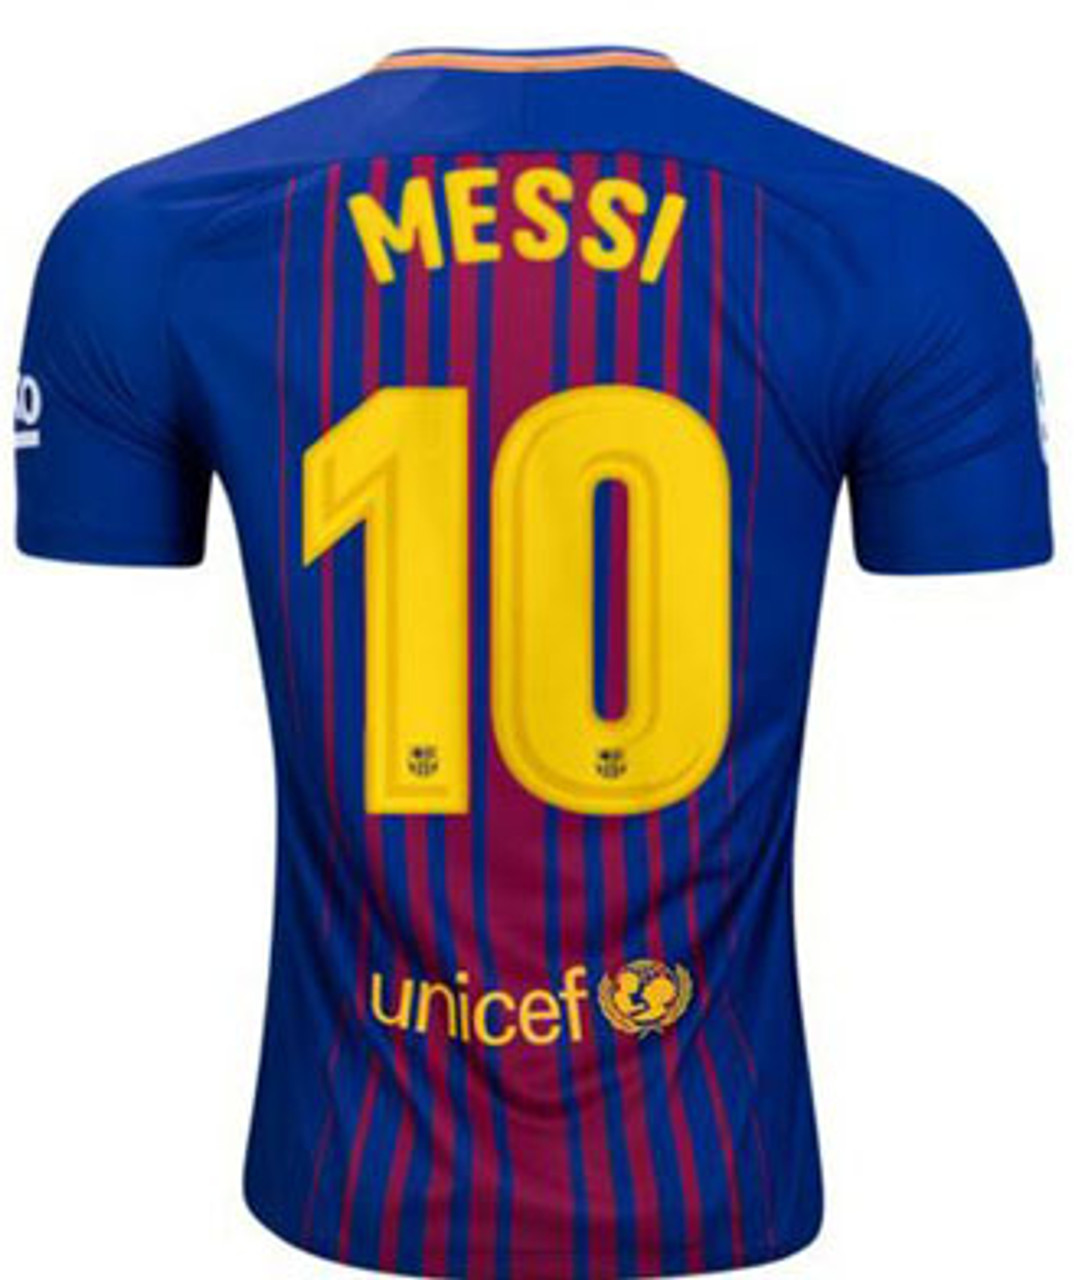 NIKE BARCELONA 2018 MESSI HOME YOUTH JERSEY - Soccer Plus